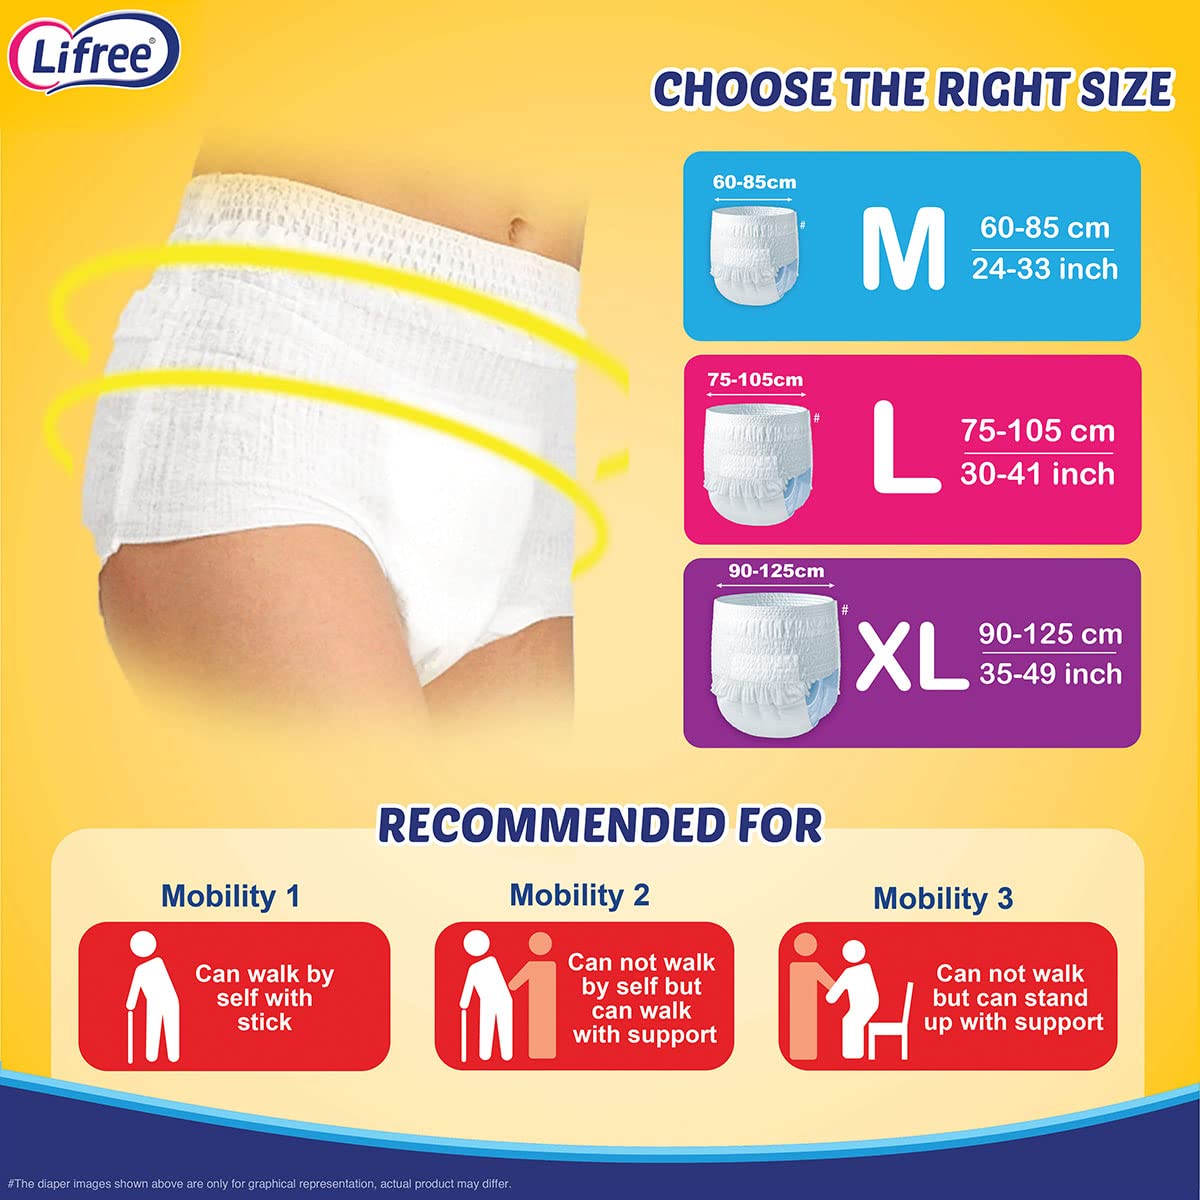 Lifree Extra Absorb Adult Diaper Pants Unisex, X-Large (XL), 10 Pieces, Waist size (90-125 cm | 35-49 Inches)